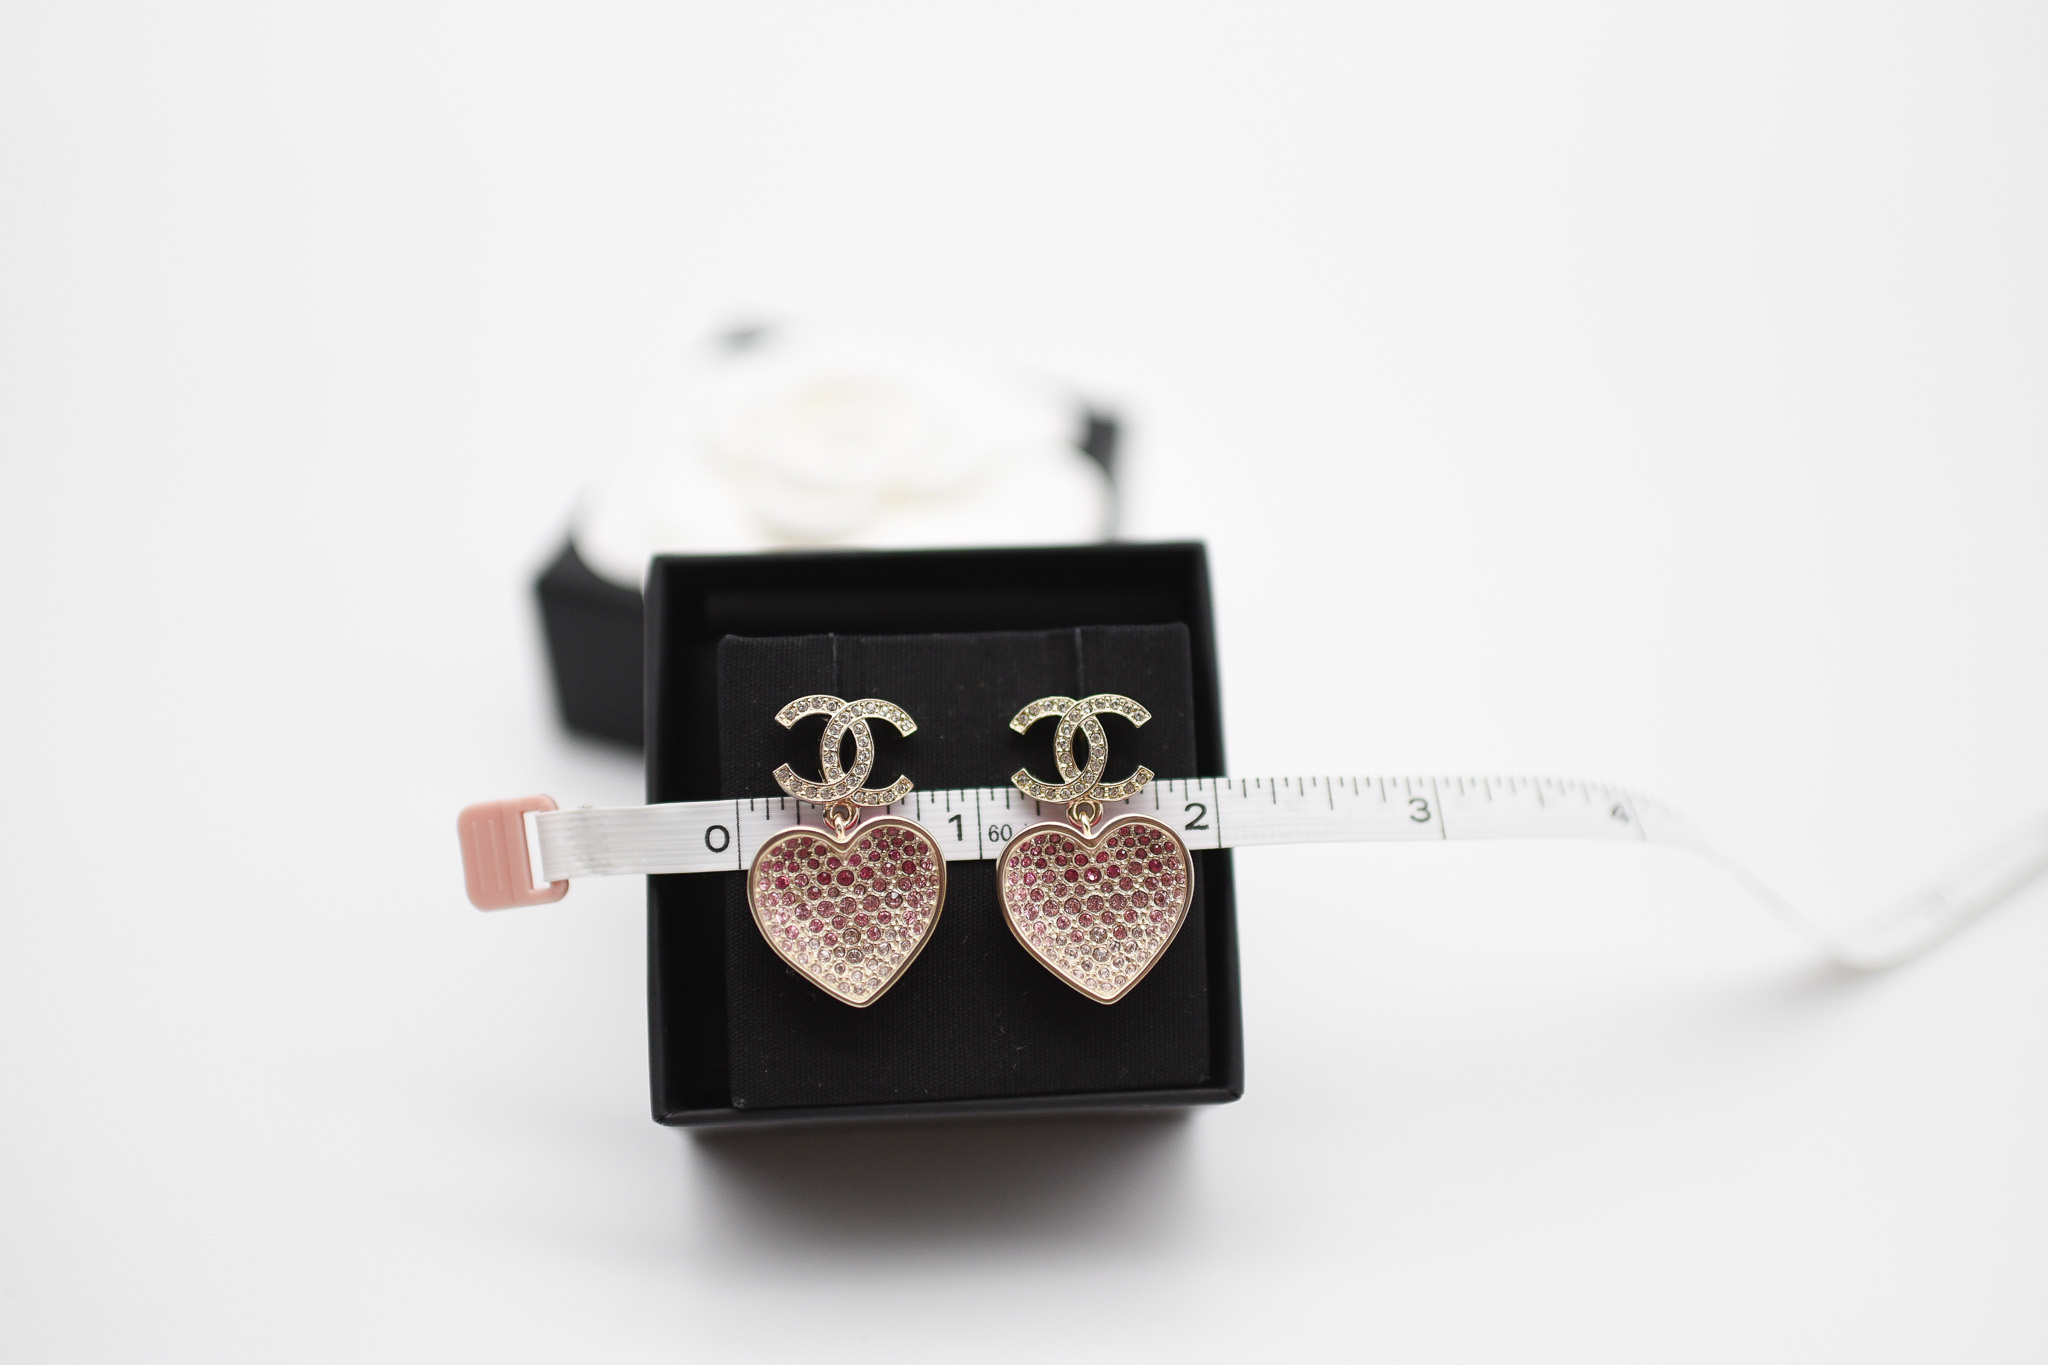 Chanel Earrings Heart Drop, Pink Crystals, Gold Hardware, New in Box GA001